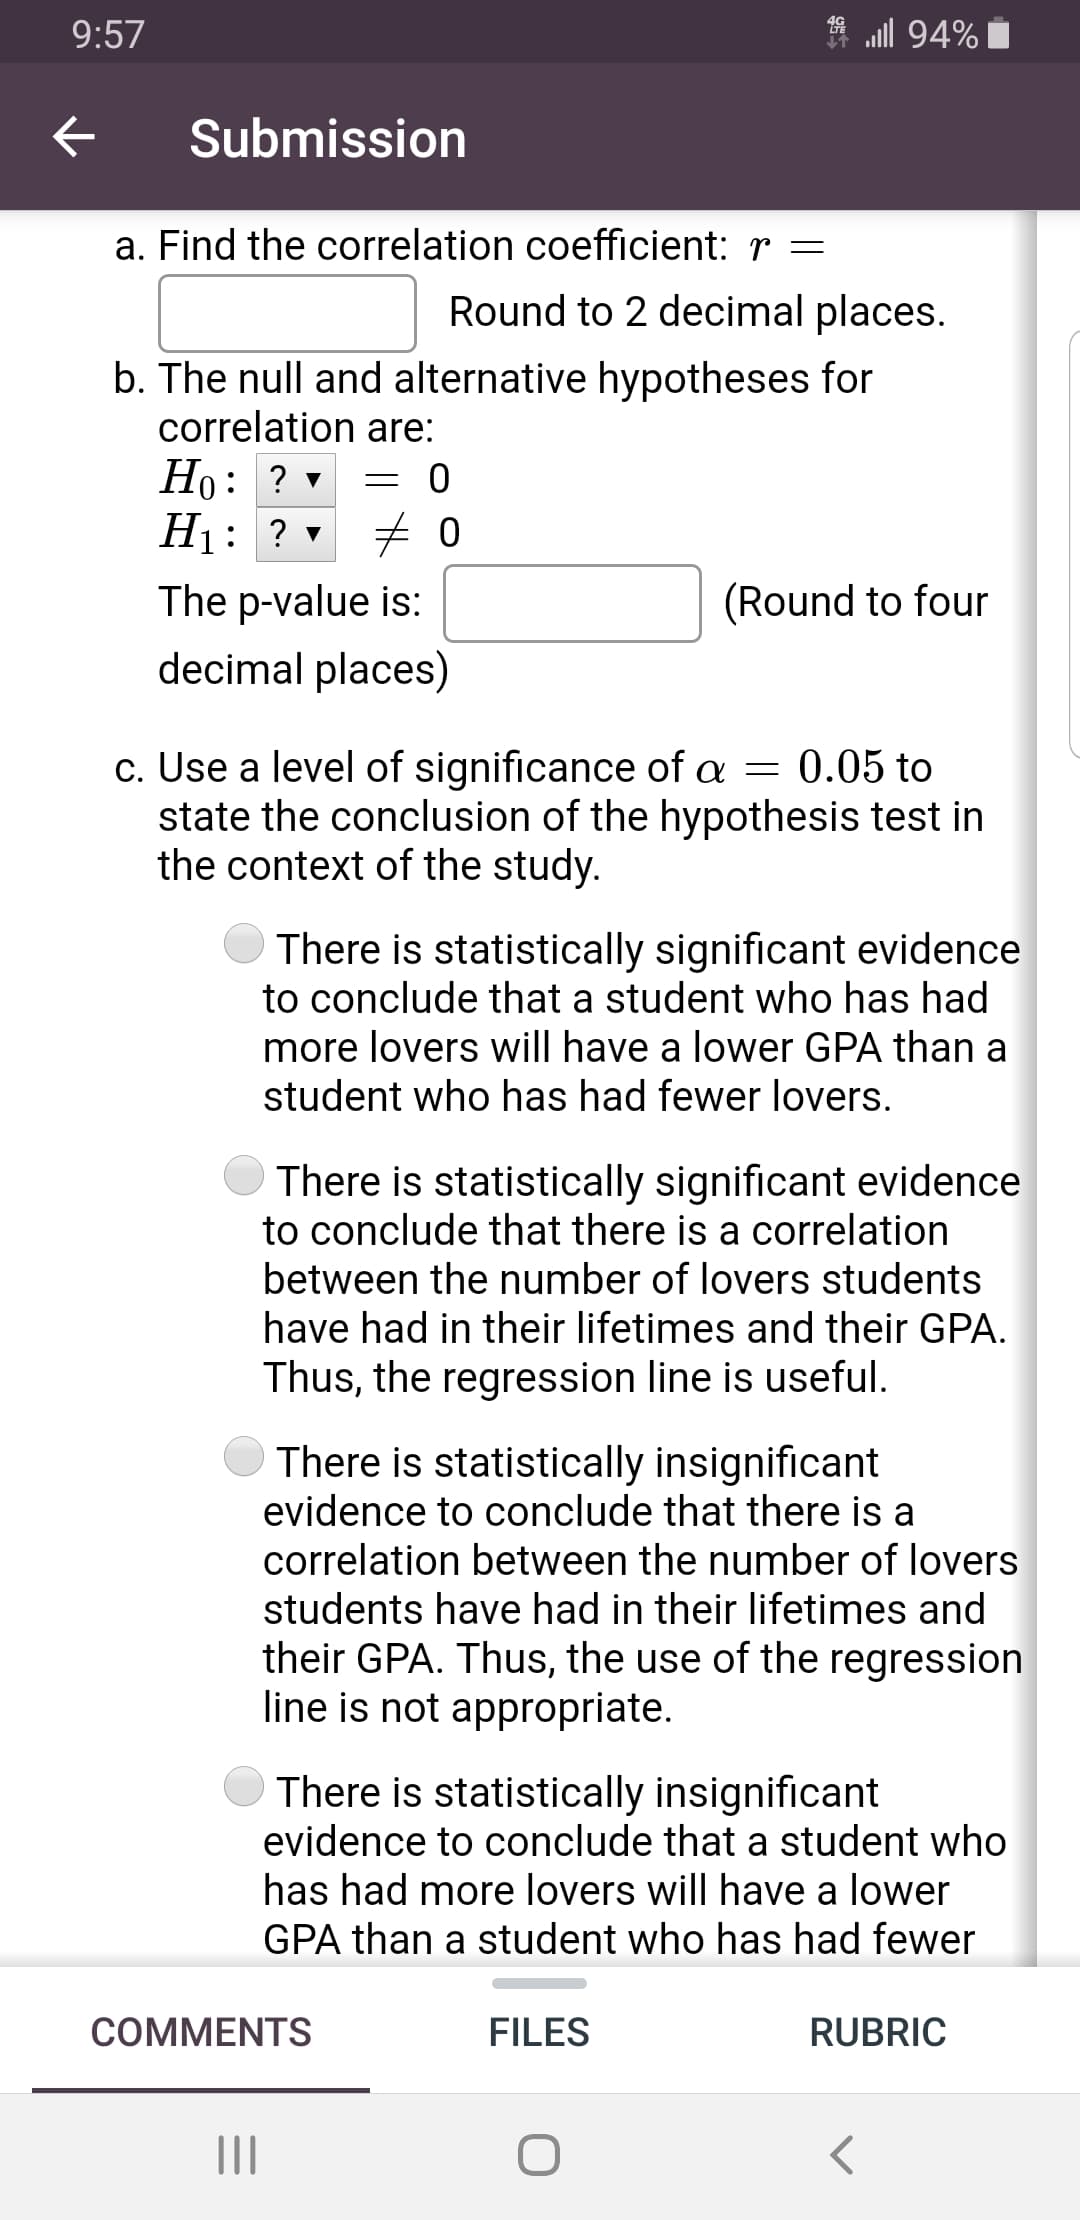 a. Find the correlation coefficient: r =
Round to 2 decimal places.
b. The null and alternative hypotheses for
correlation are:
Но: ?
H1: ? v
The p-value is:
(Round to four
decimal places)
c. Use a level of significance of a = 0.05 to
state the conclusion of the hypothesis test in
the context of the study.
